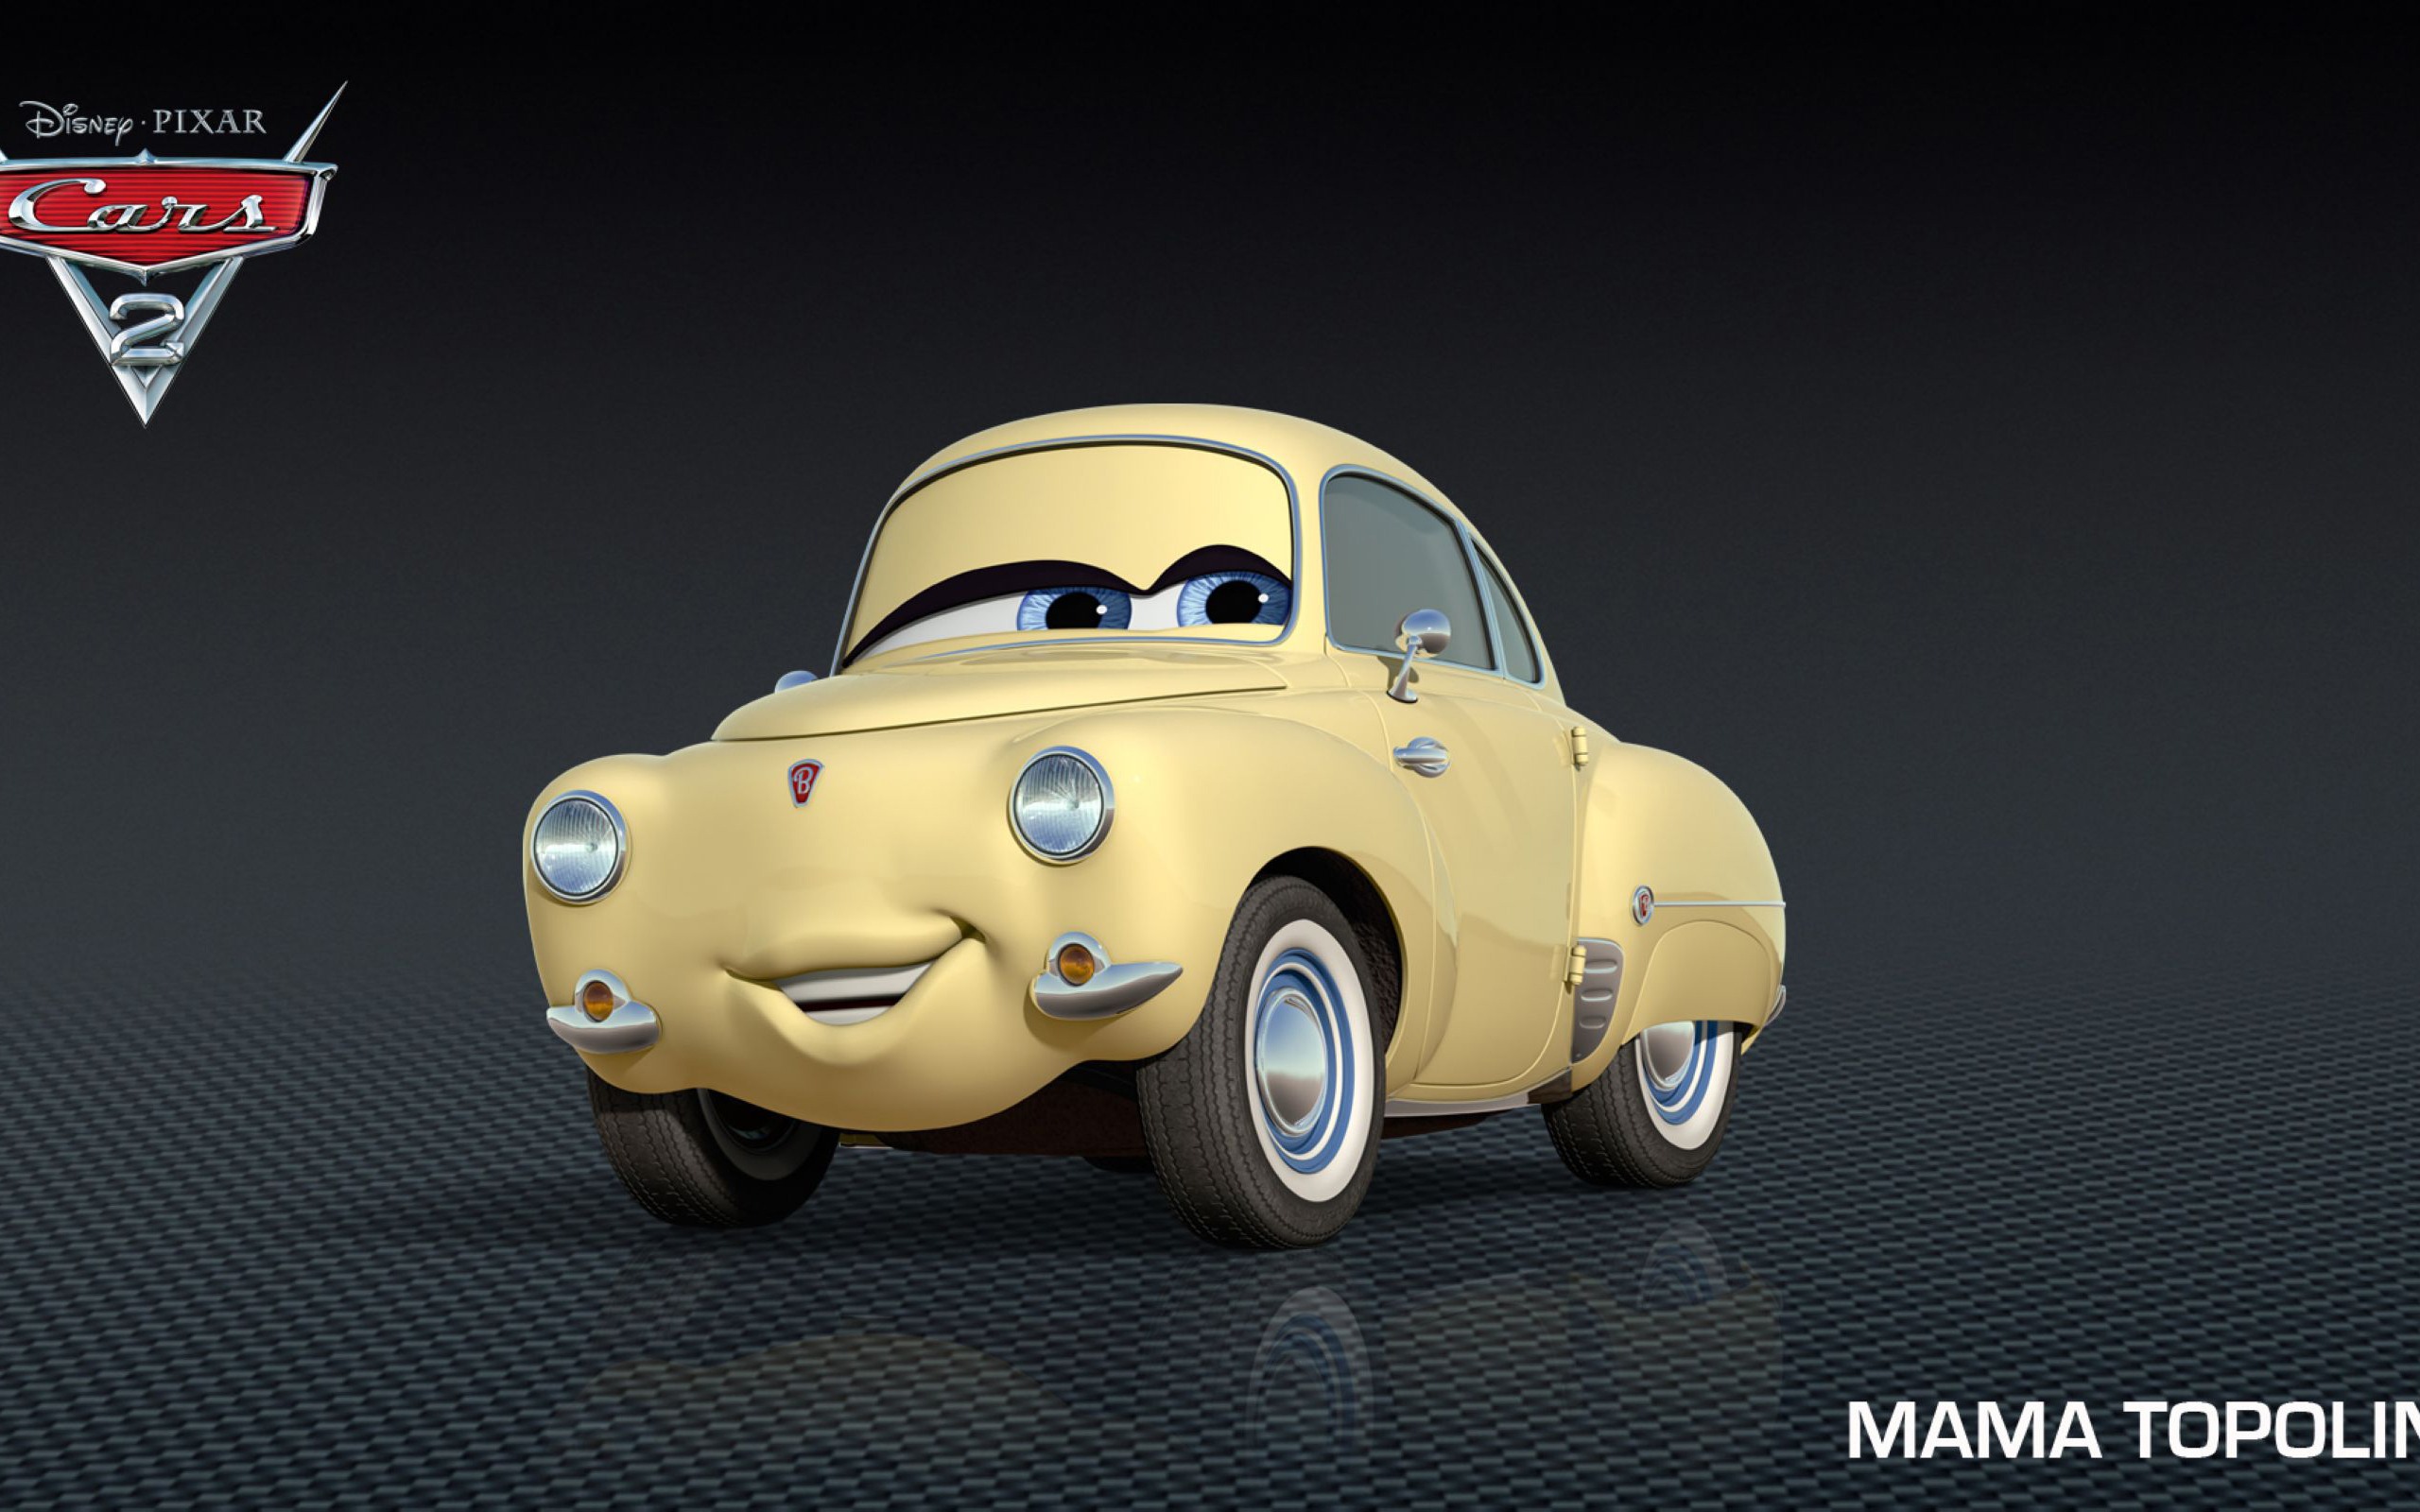 Cars 2 wallpapers #27 - 2560x1600